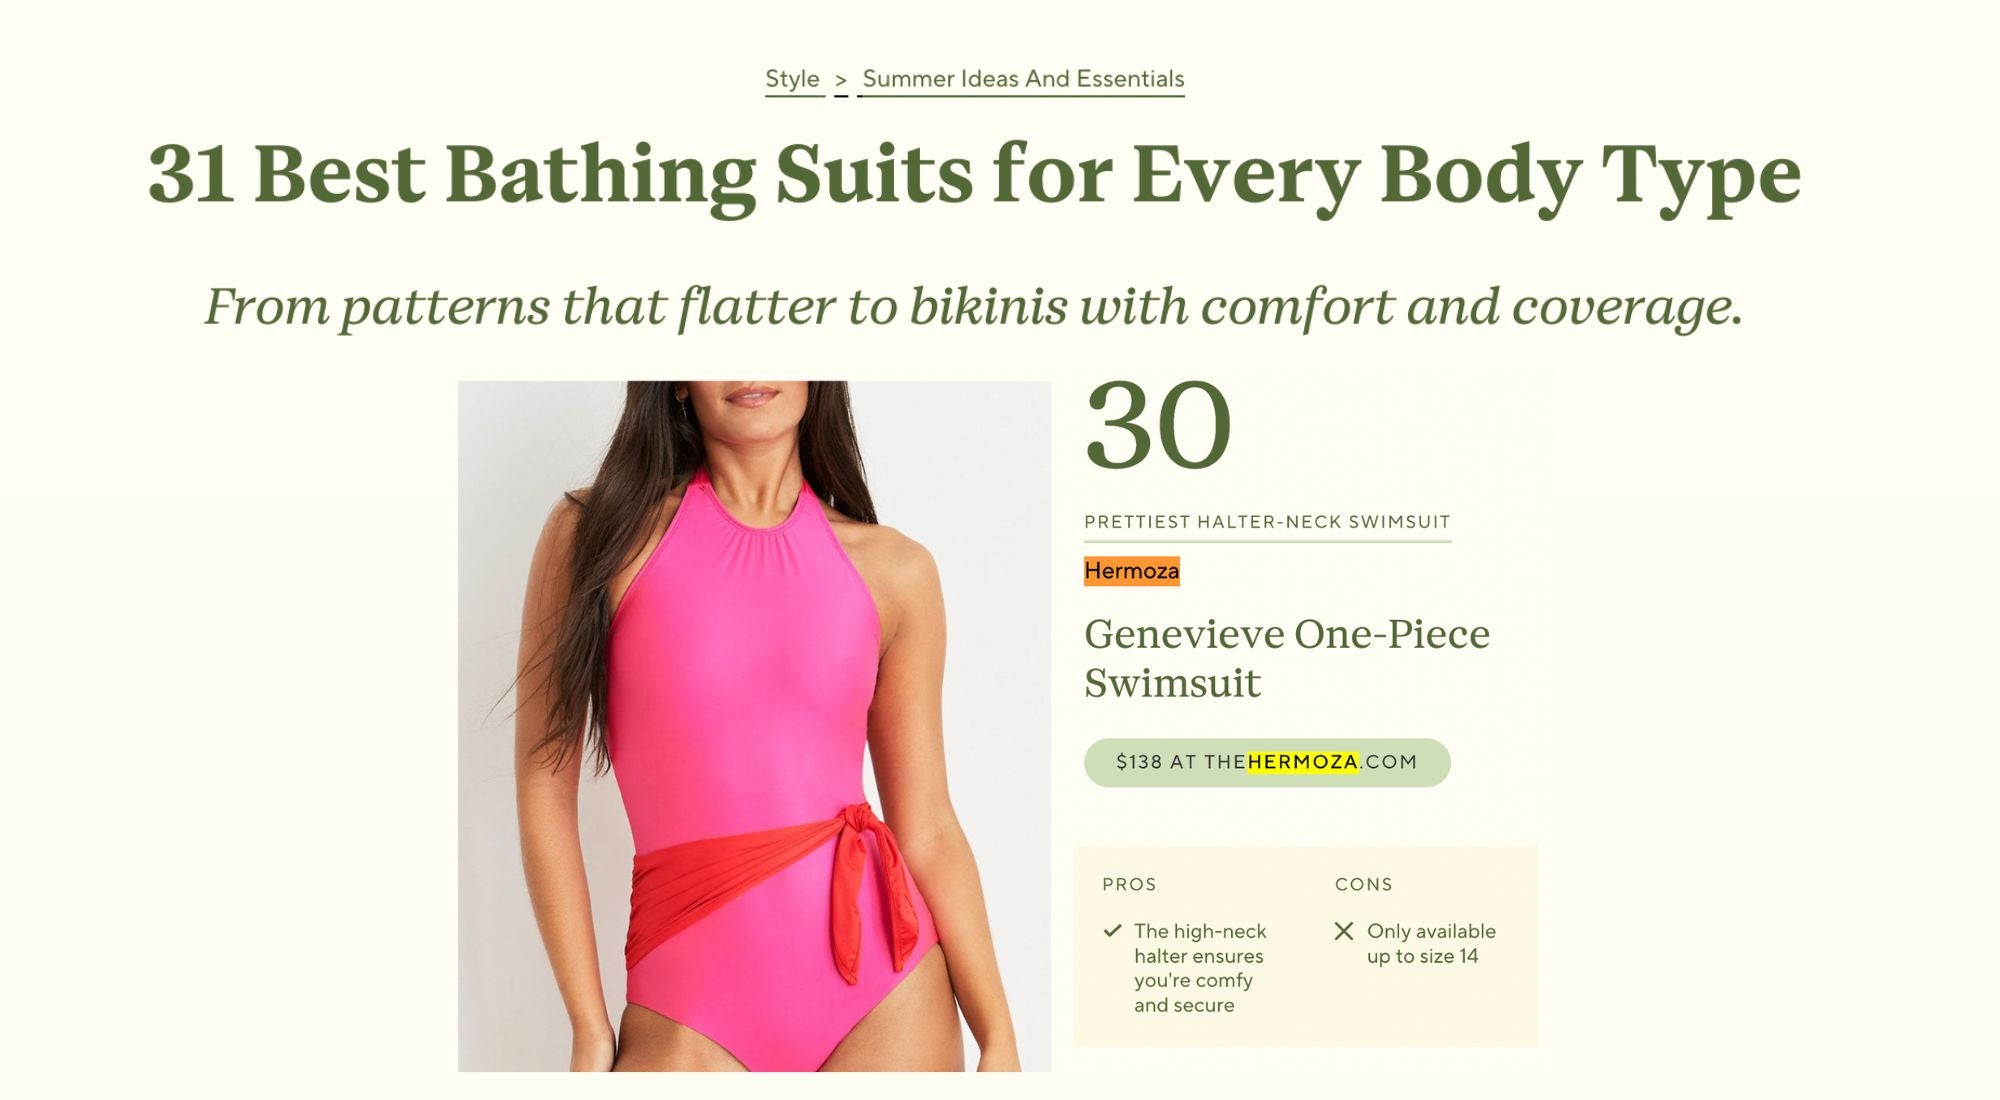 Hermoza is Featured in Oprah Daily's Best Swimsuits